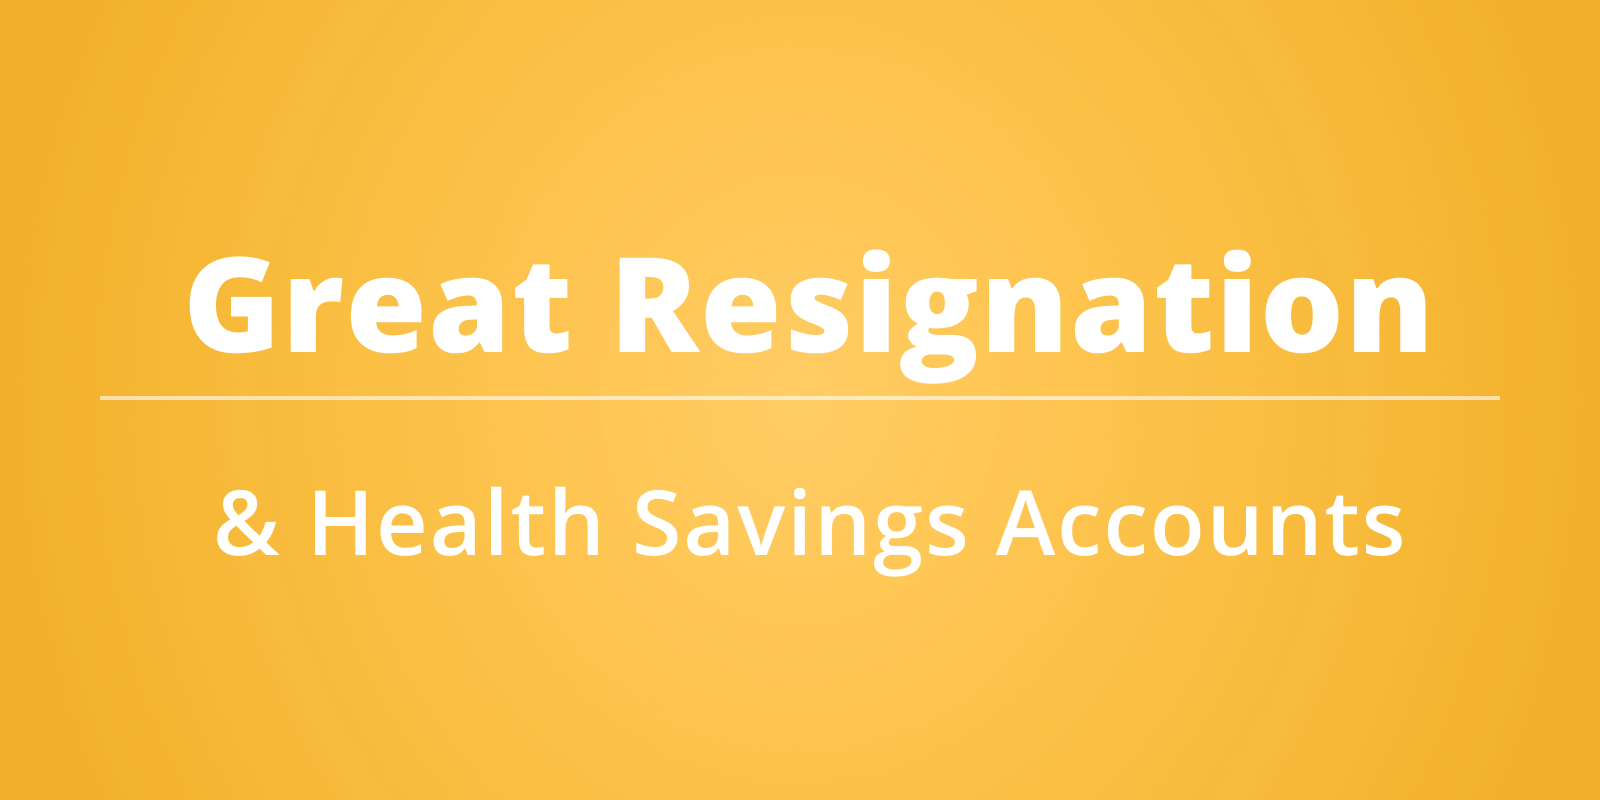 Great Resignation and the HSA